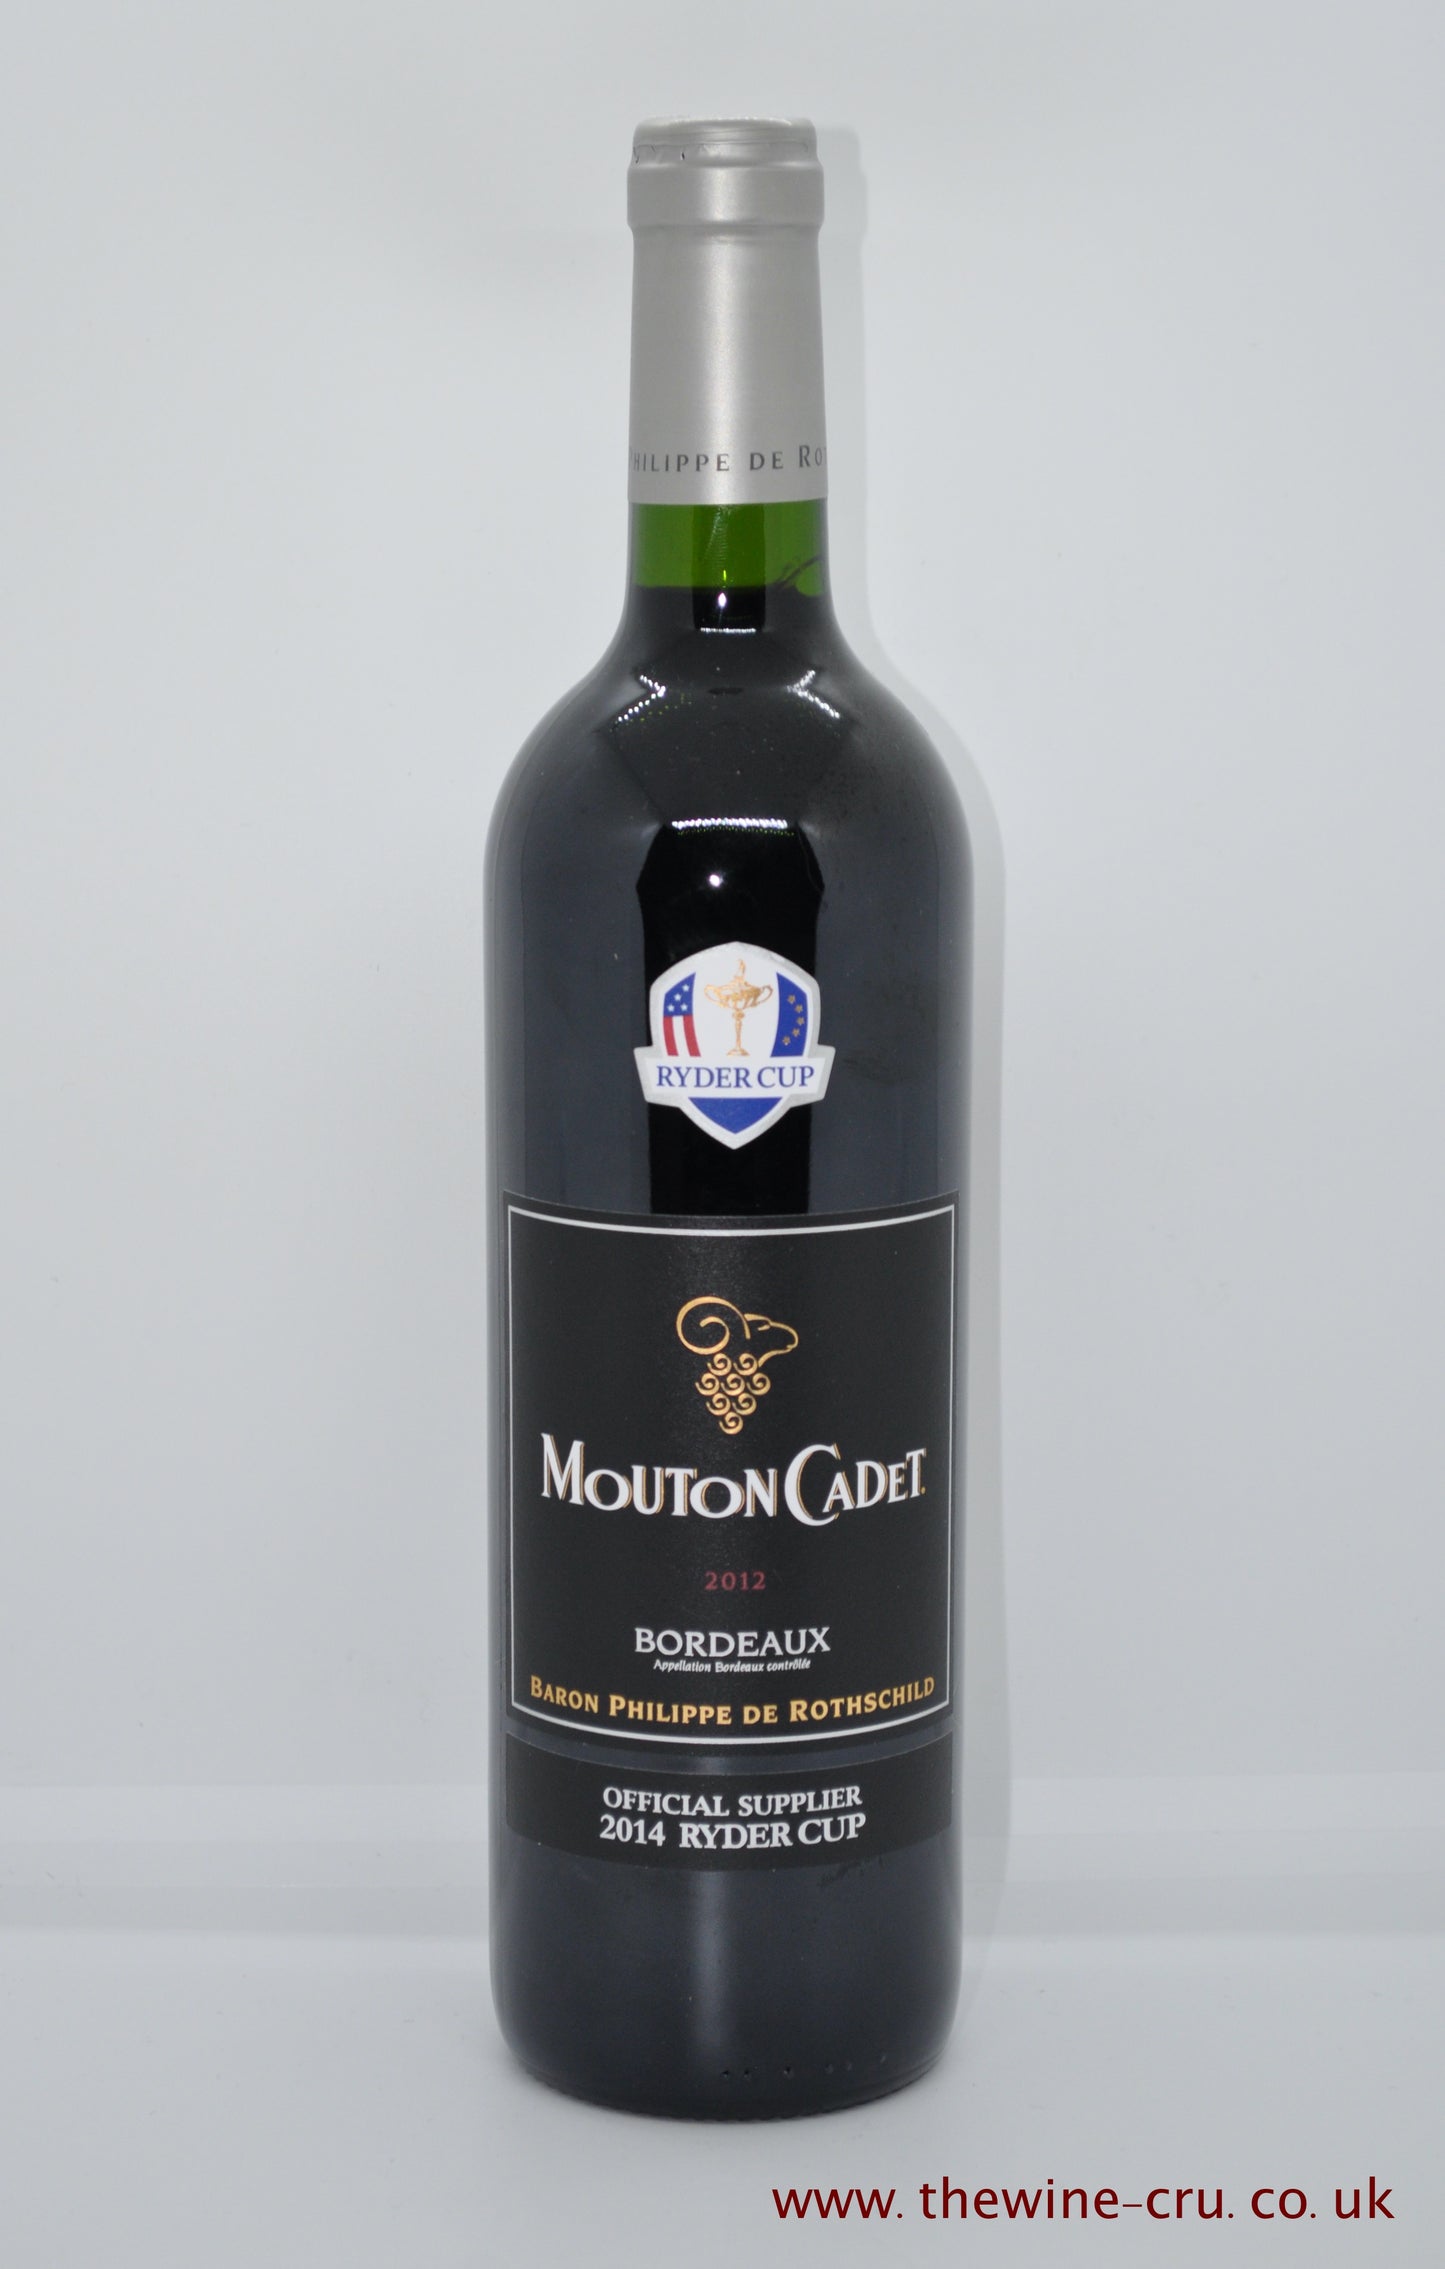 2012 vintage red wine. Mouton Cadet 2012 Ryder Cup 2014 Commemorative bottle. Immediate delivery UK. Free local delivery.